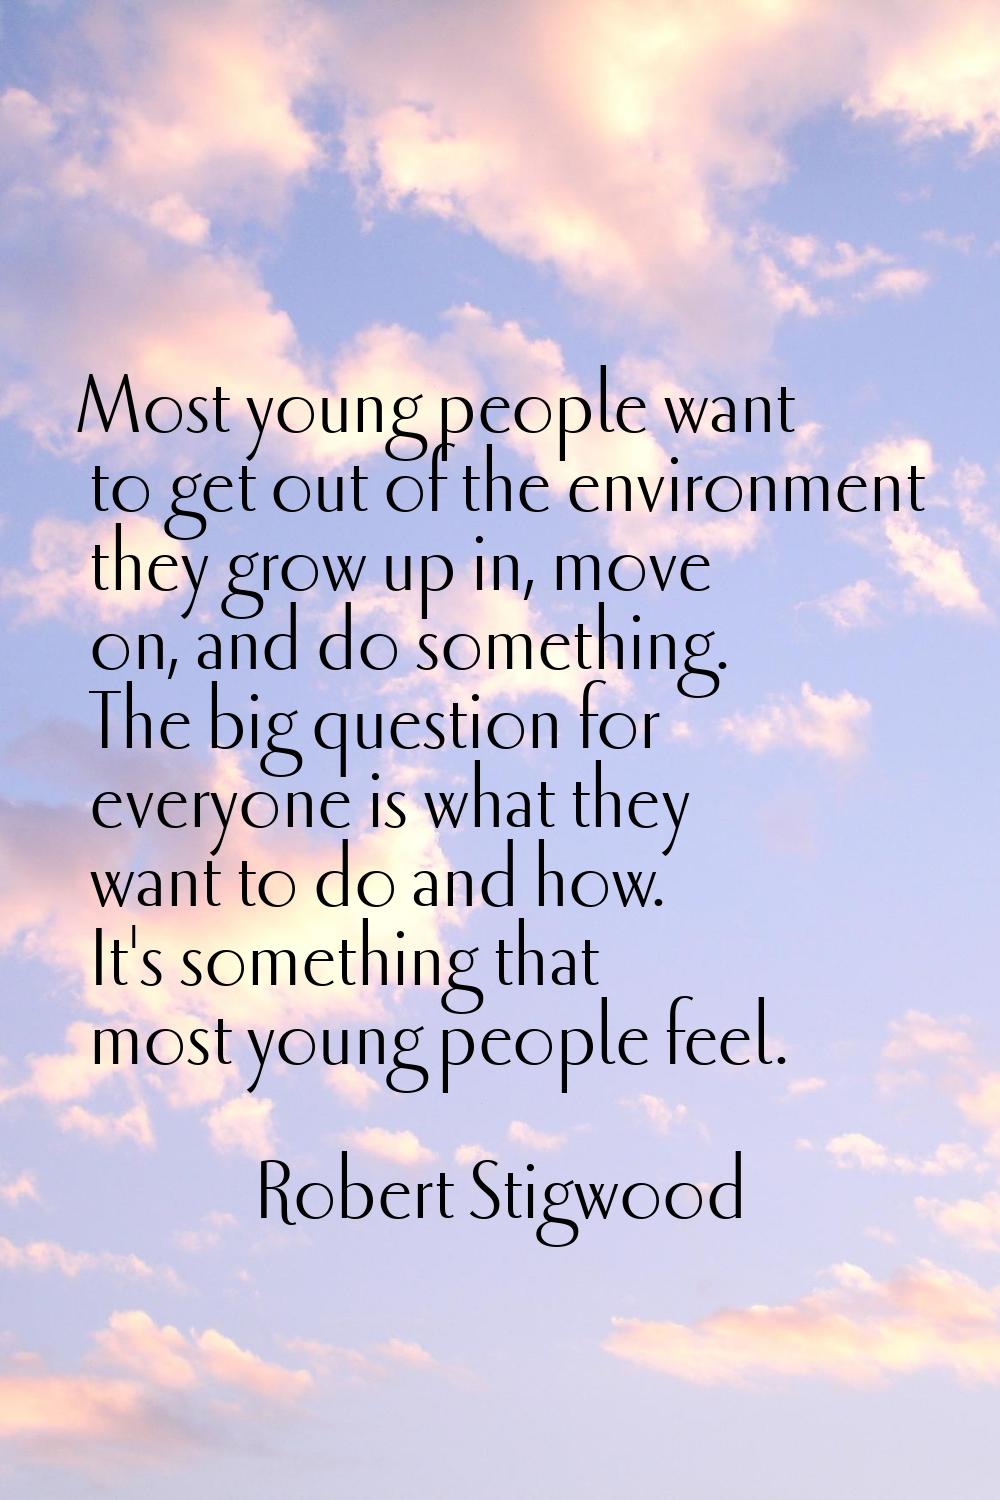 Most young people want to get out of the environment they grow up in, move on, and do something. Th